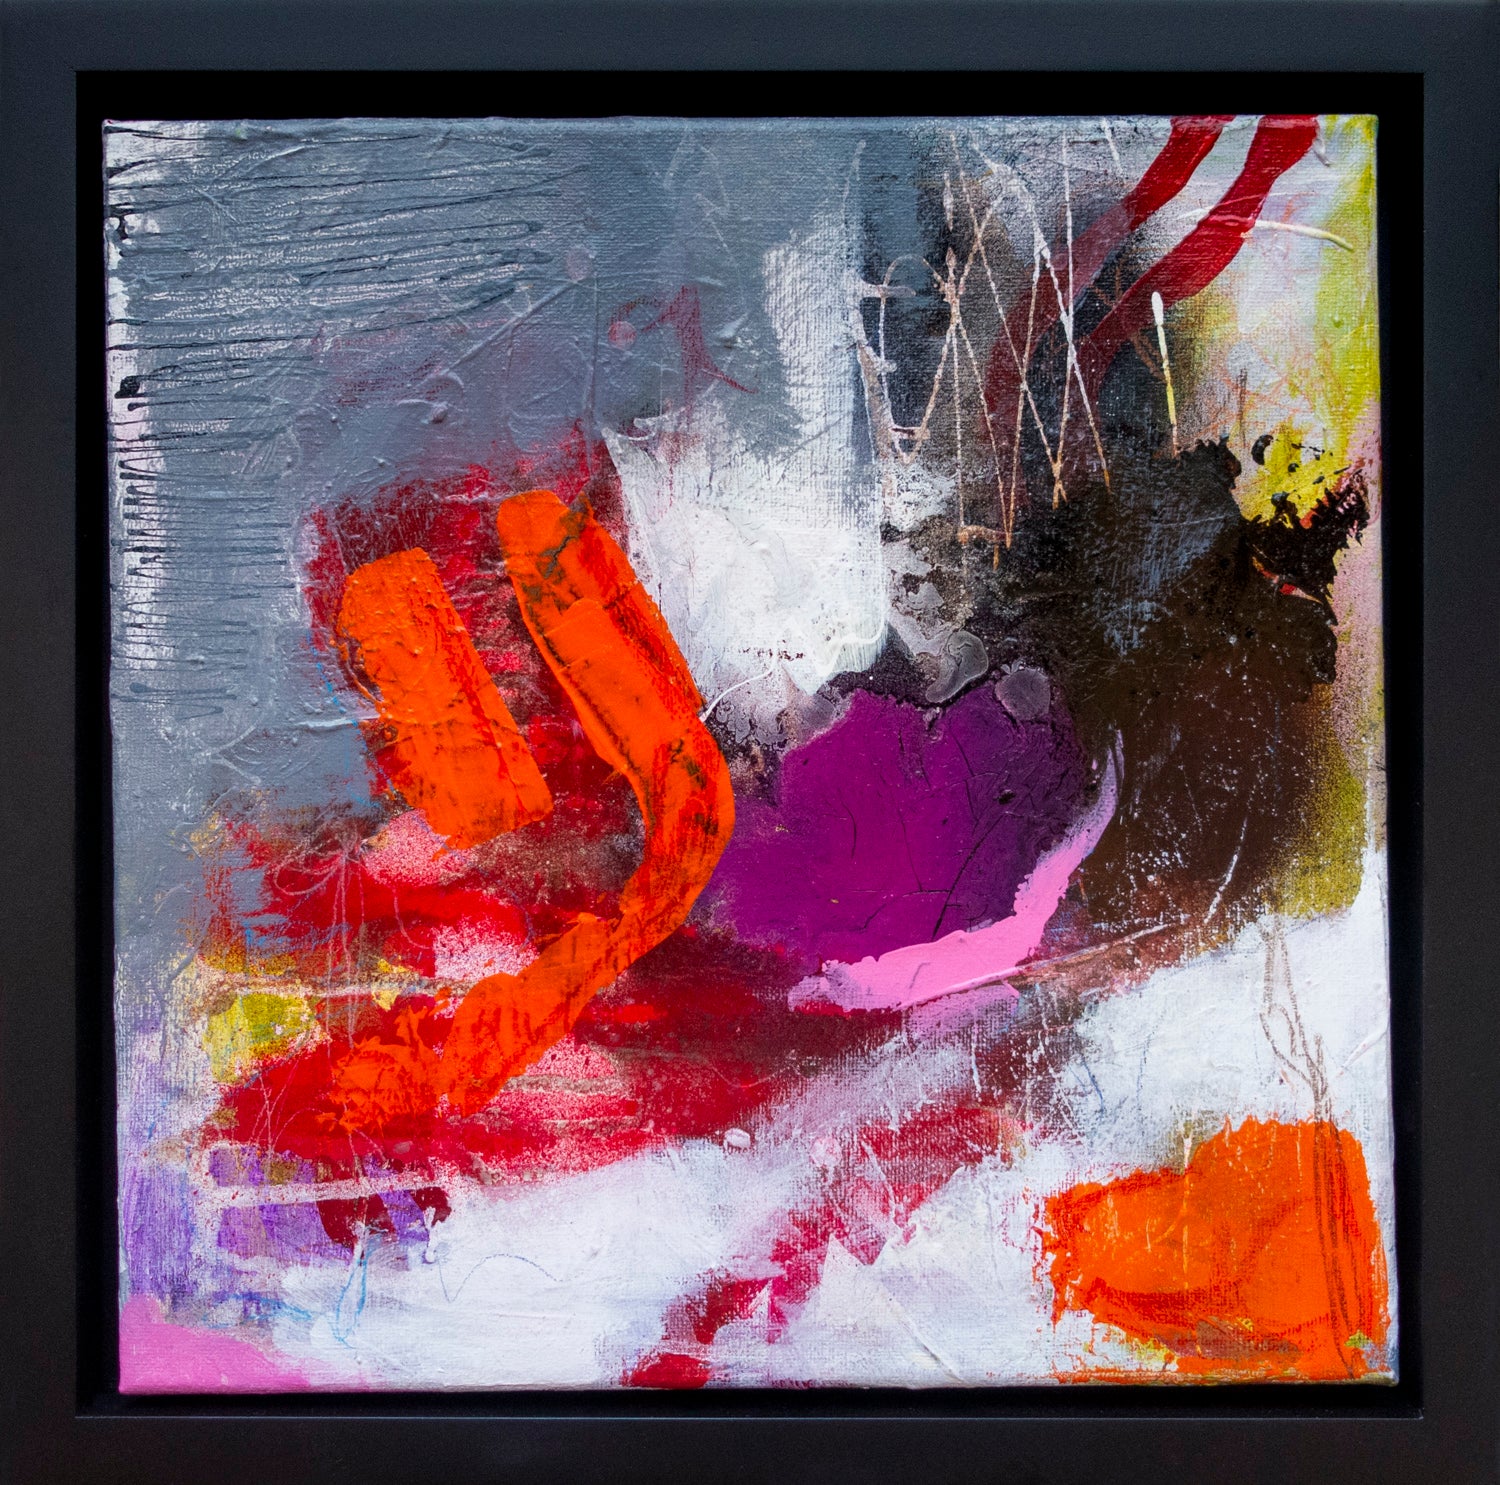 Colorful abstract painting using acrylic paint titled 'Break Free II' by artist Steffi Möllers; canvas measures 12"x12"; with black wood frame measures 13"x13"